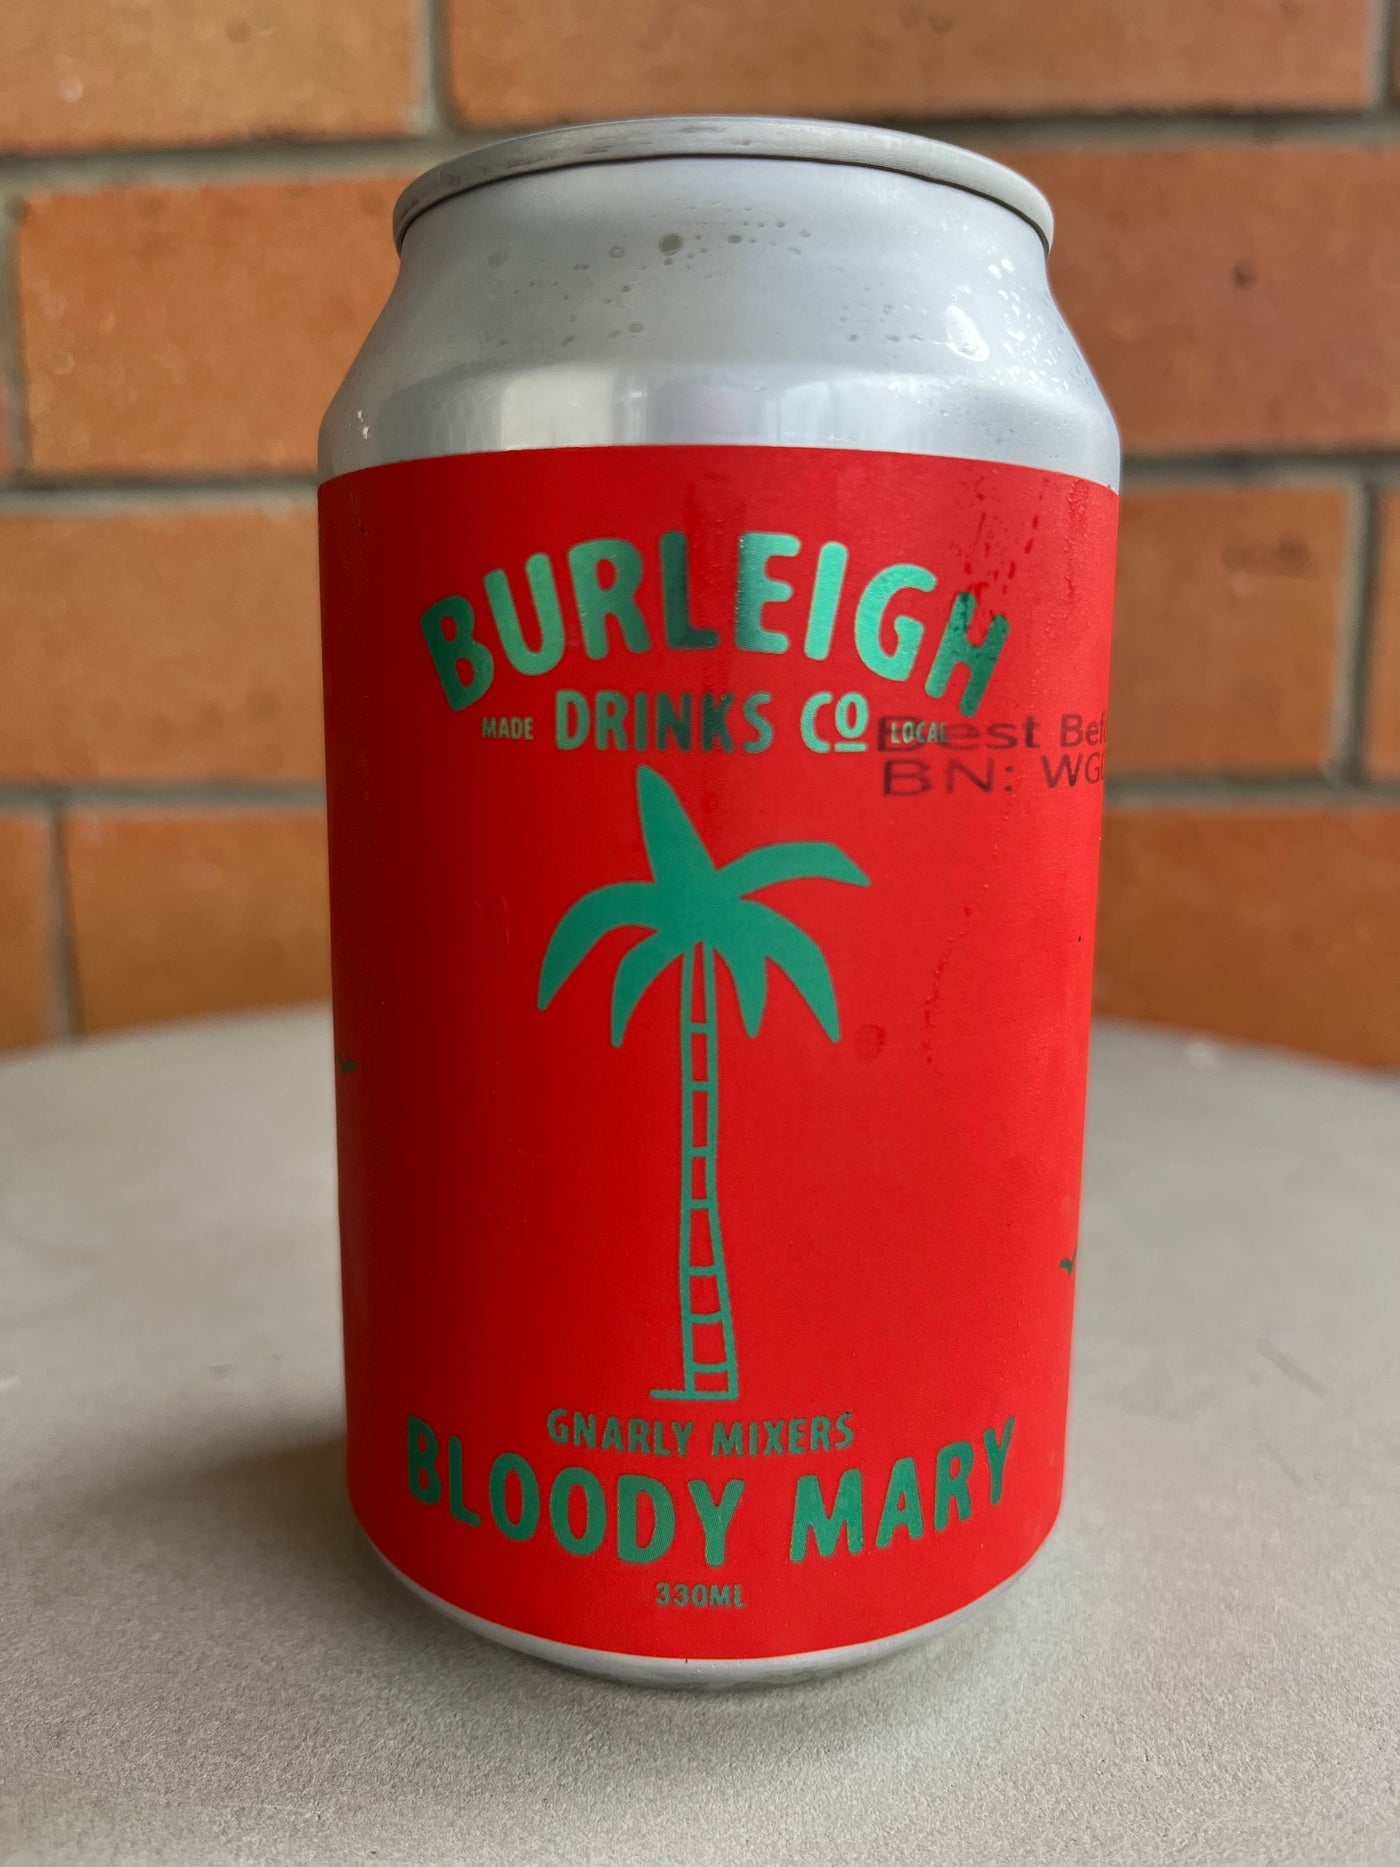 Bloody Mary Cocktail Mixer by Burleigh Drinks Co